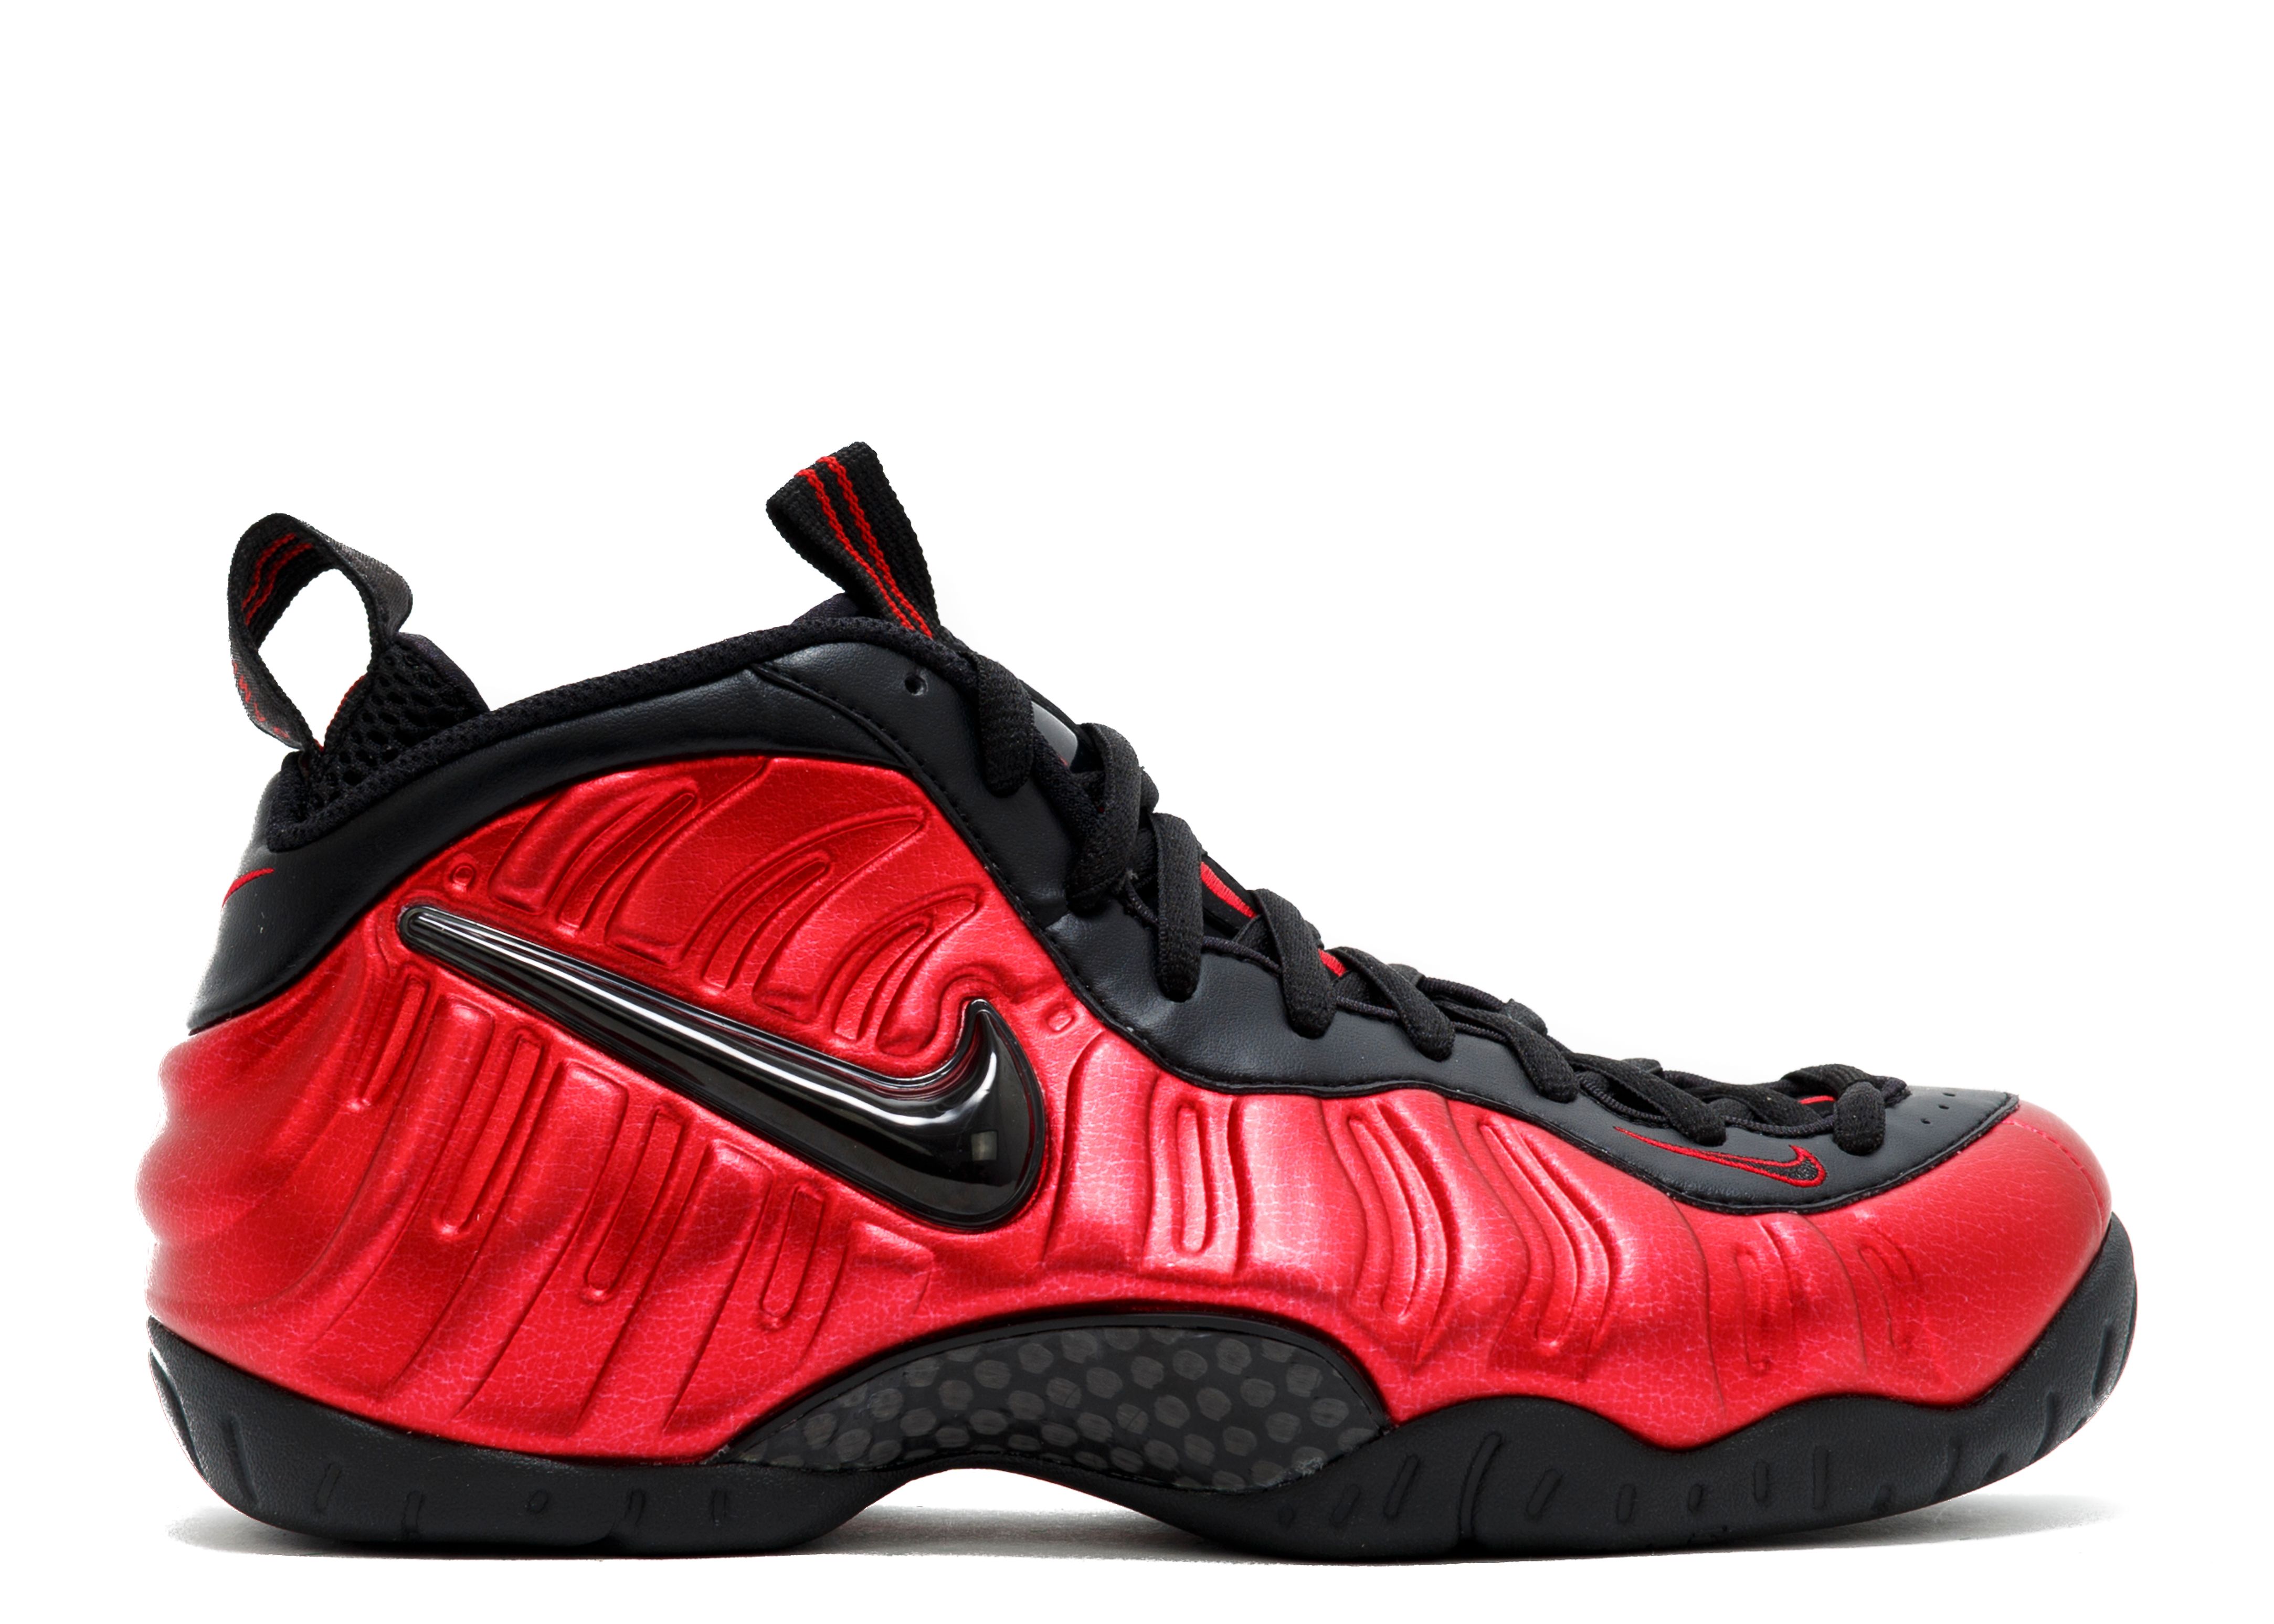 show me pictures of foamposites